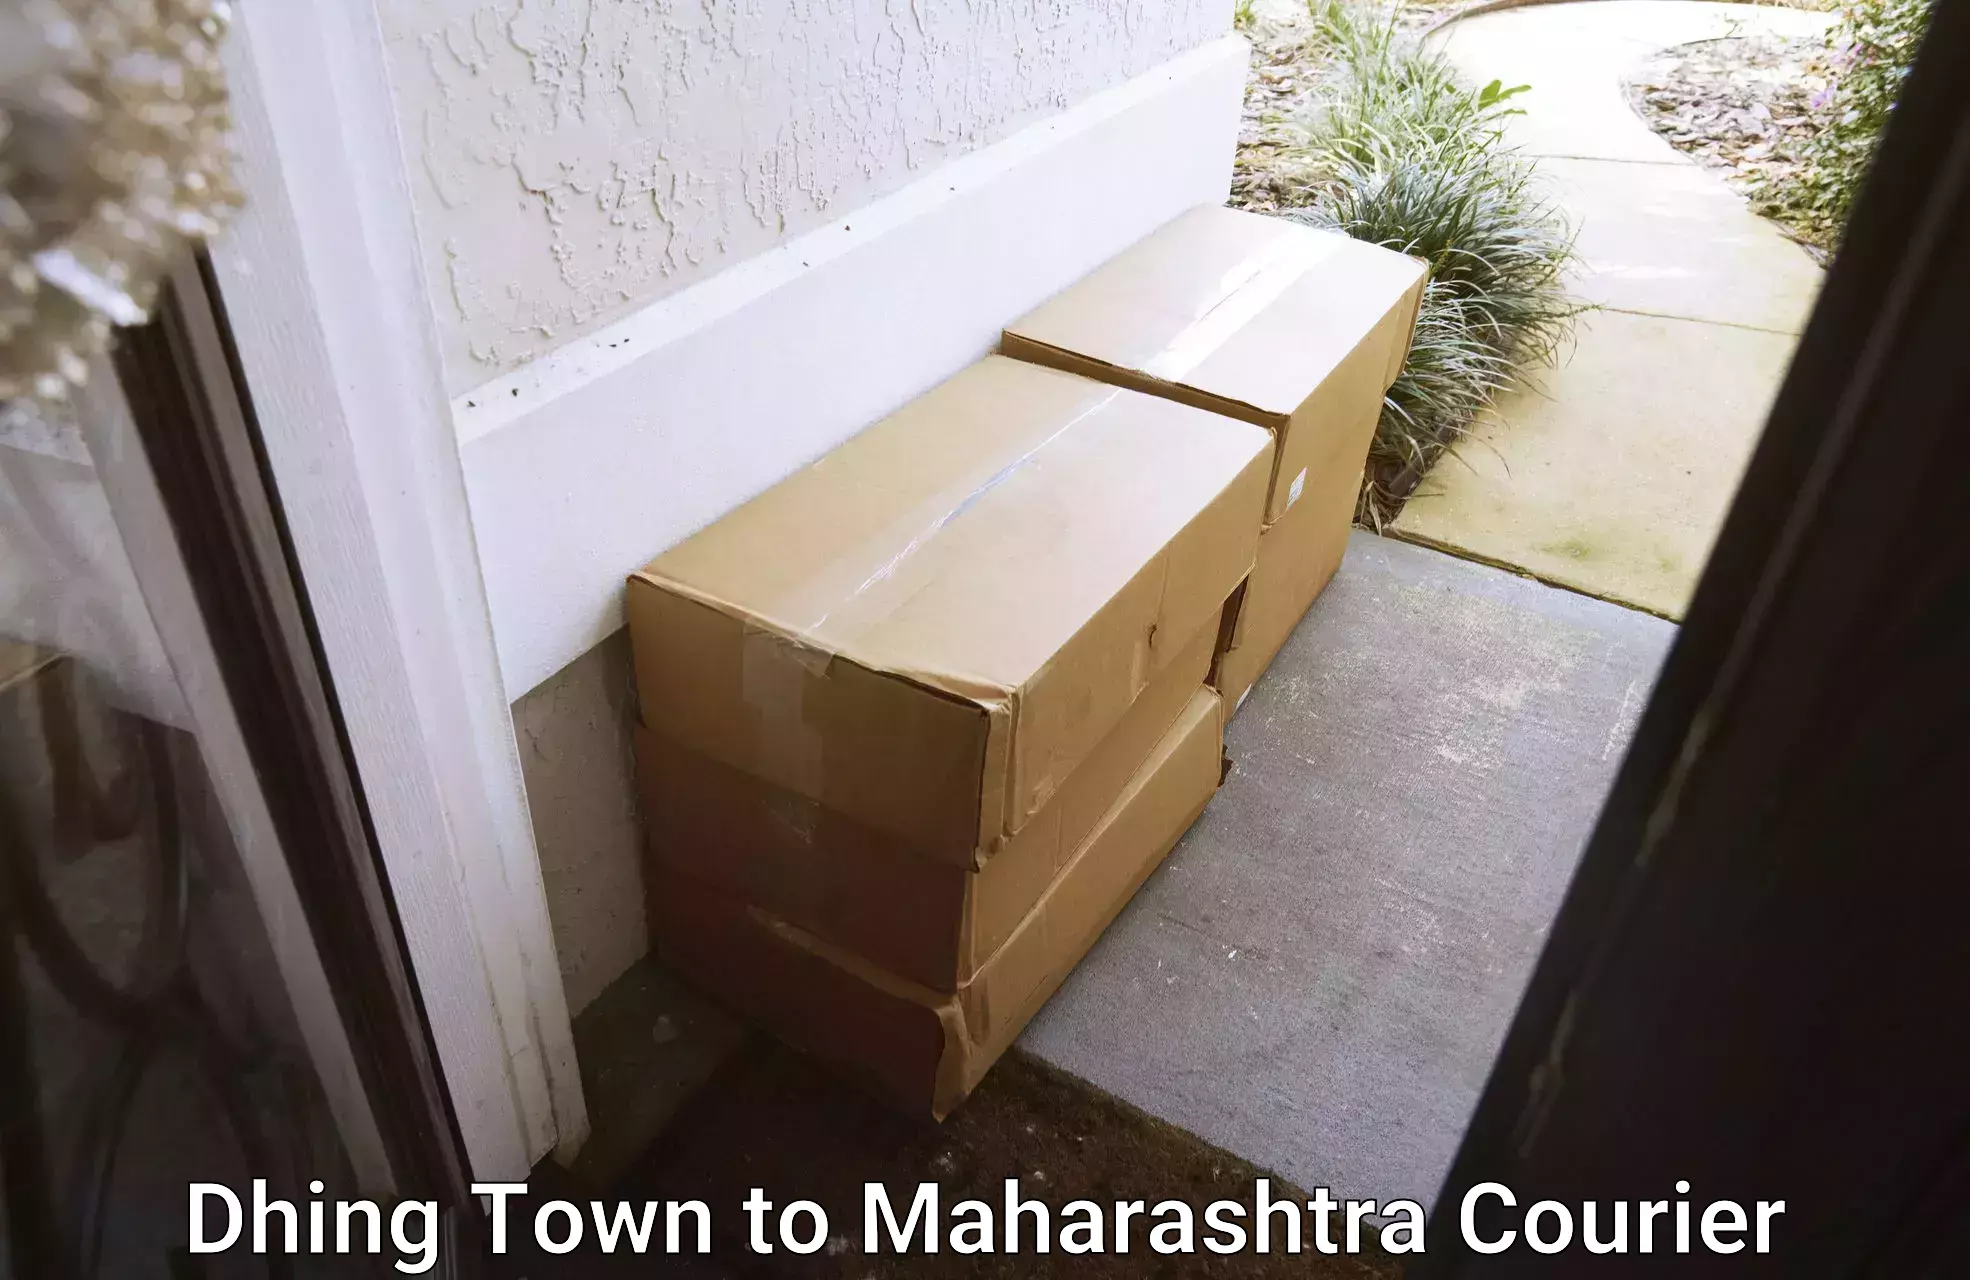 Courier service booking Dhing Town to Mumbai Port